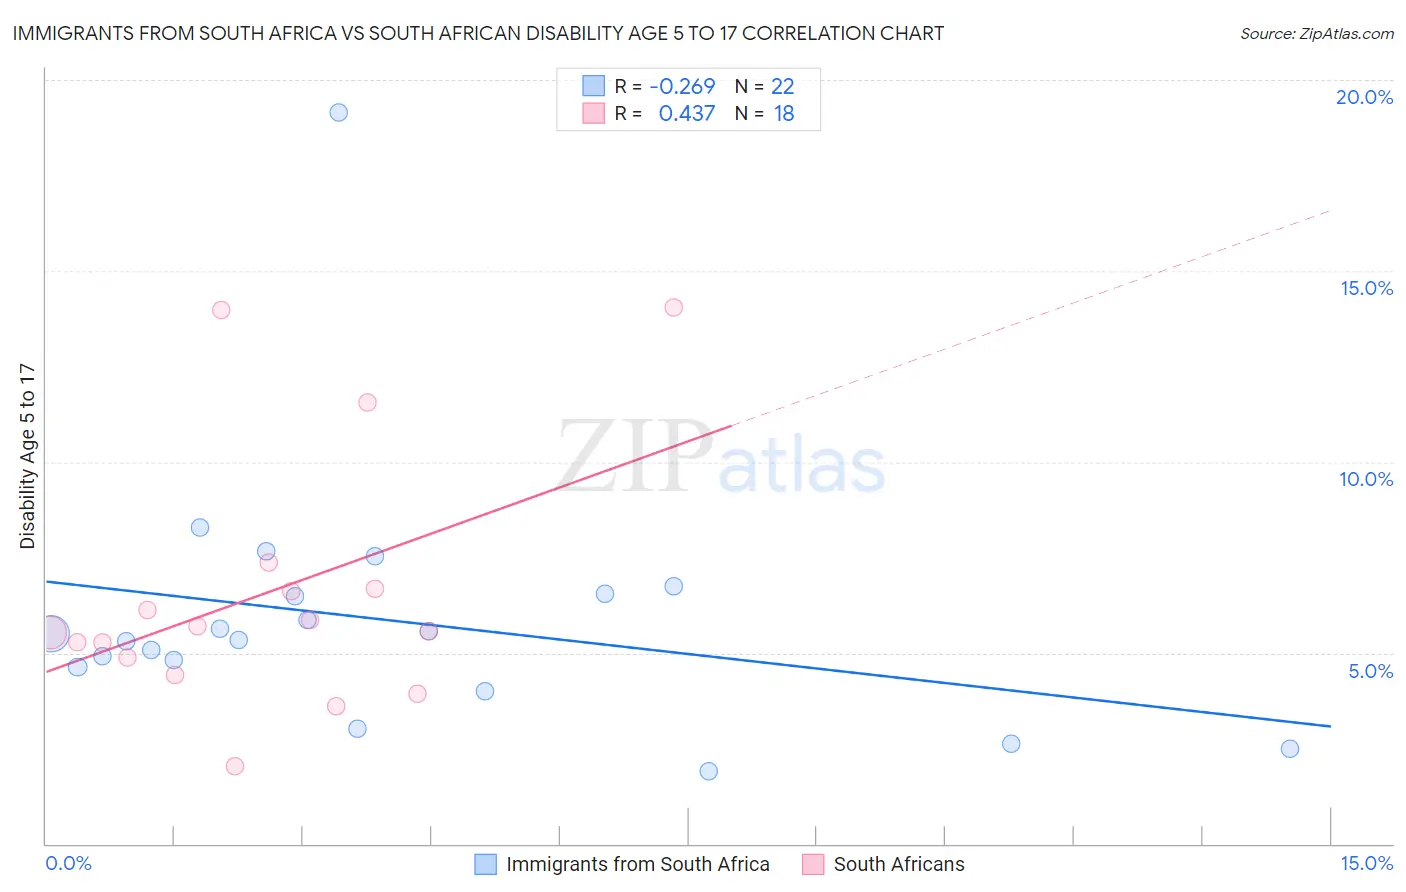 Immigrants from South Africa vs South African Disability Age 5 to 17